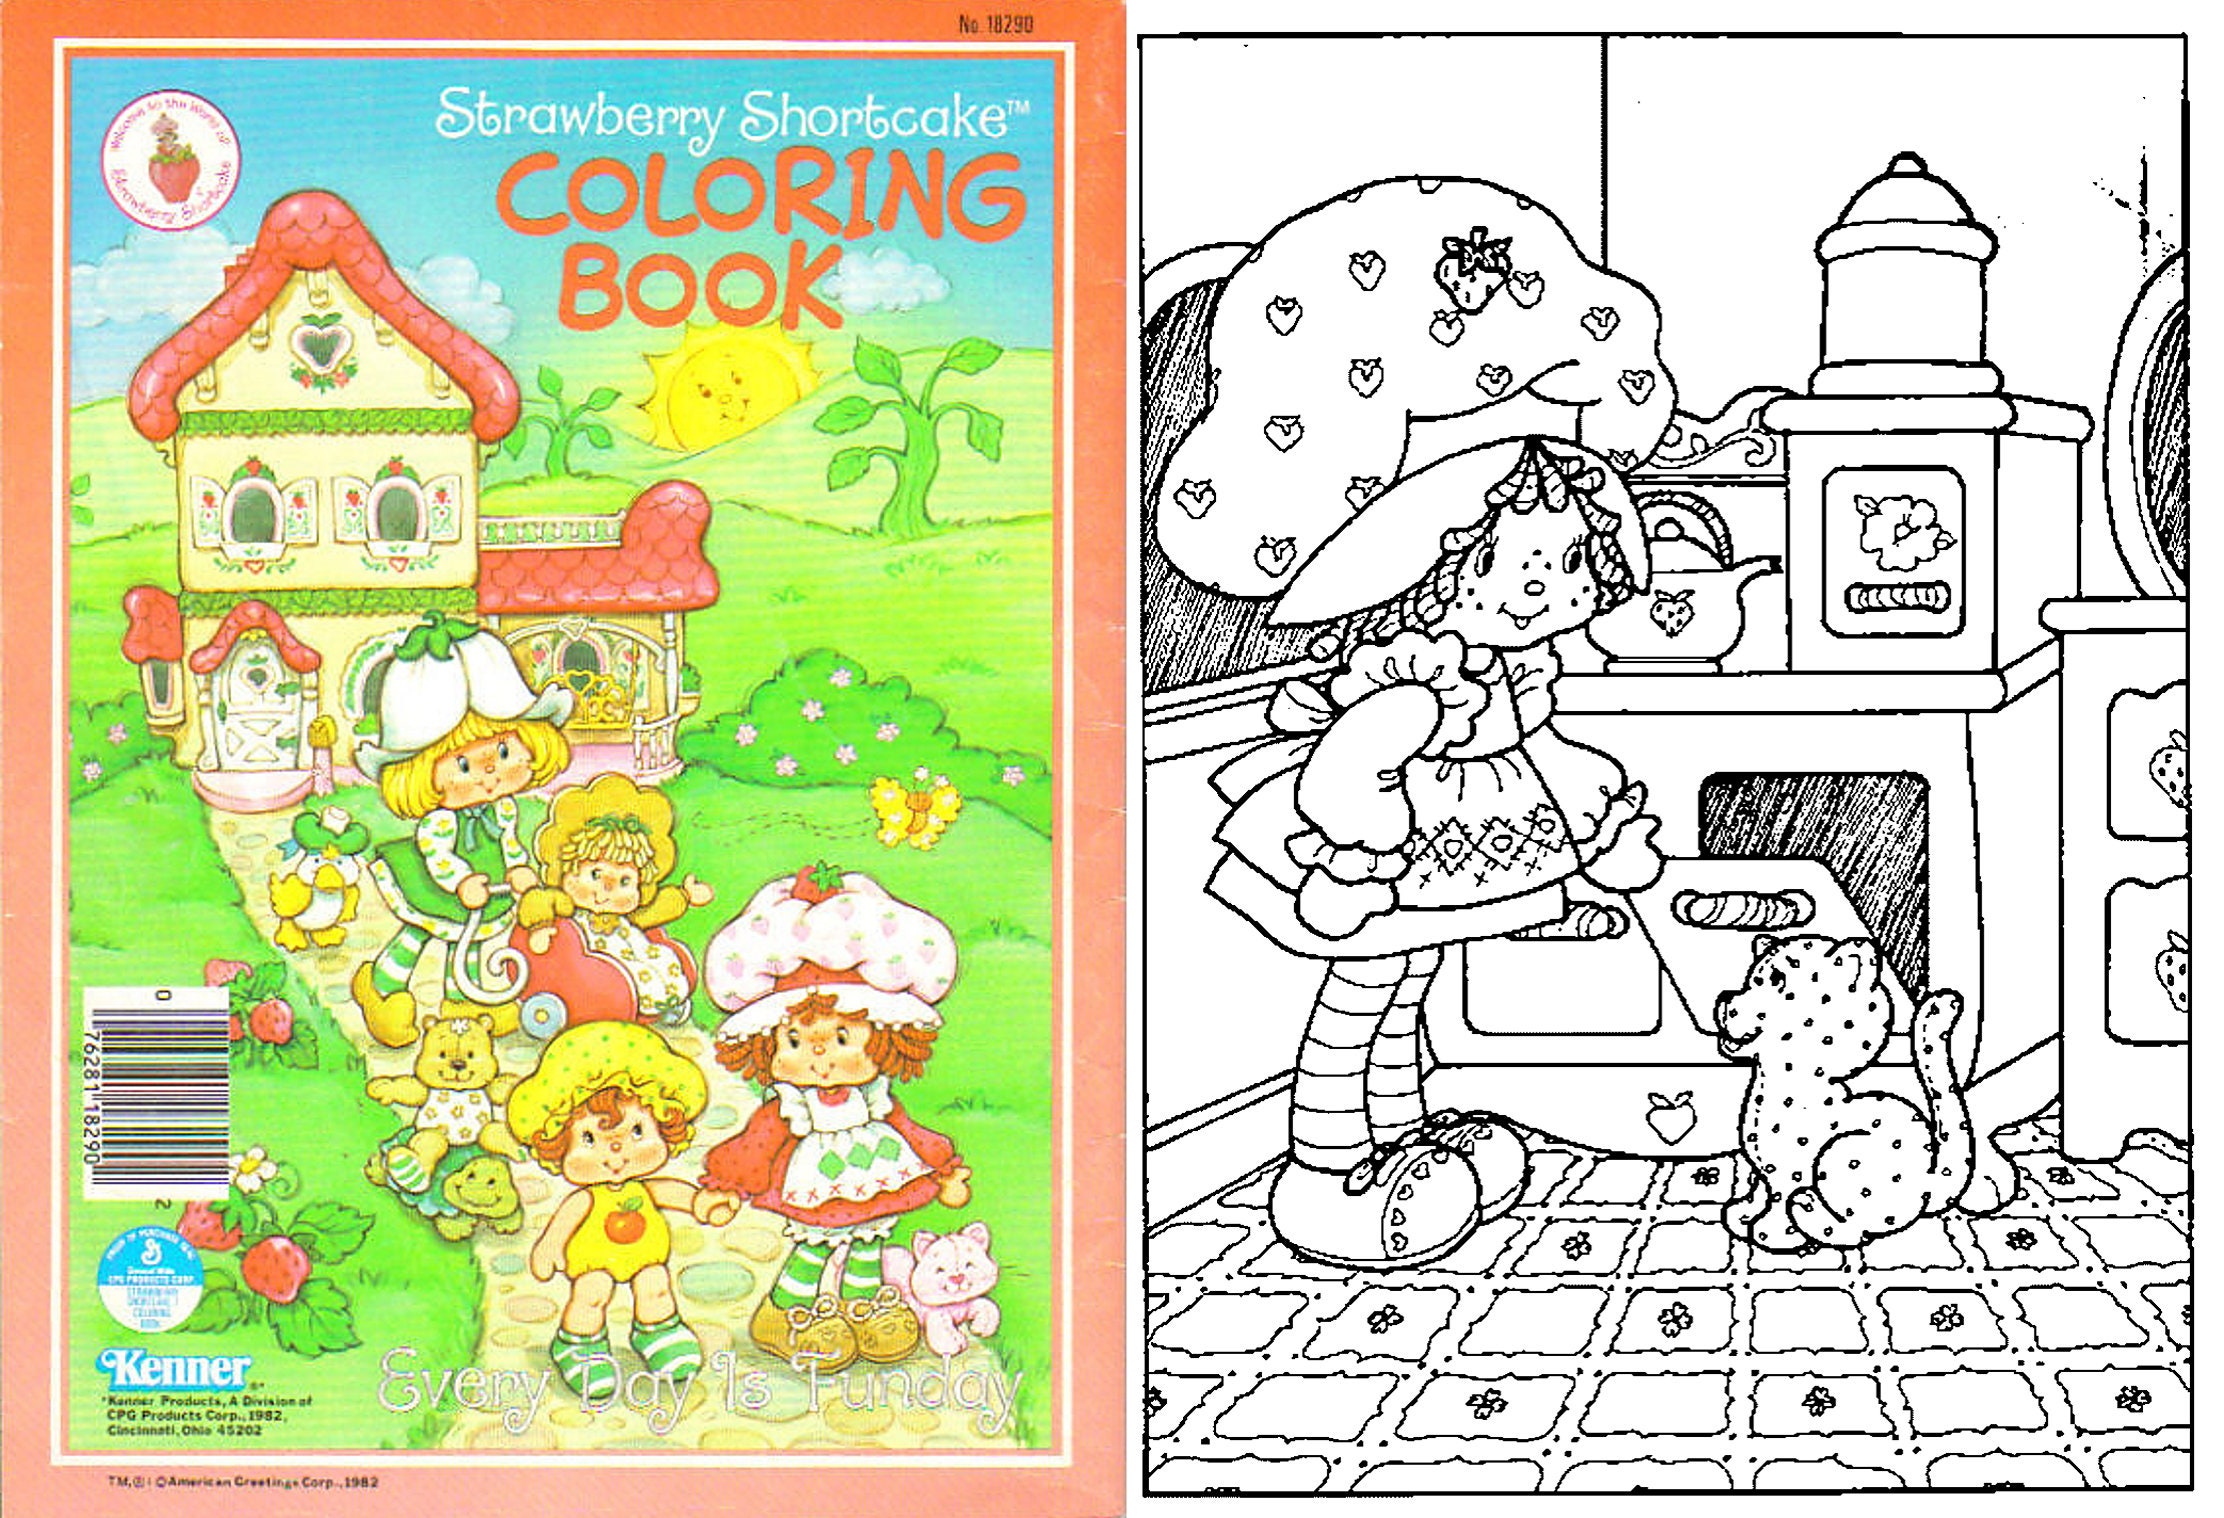 OFFER 5 Strawberry Shortcake's Books Coloring Books Instant Download, PDF  Format 